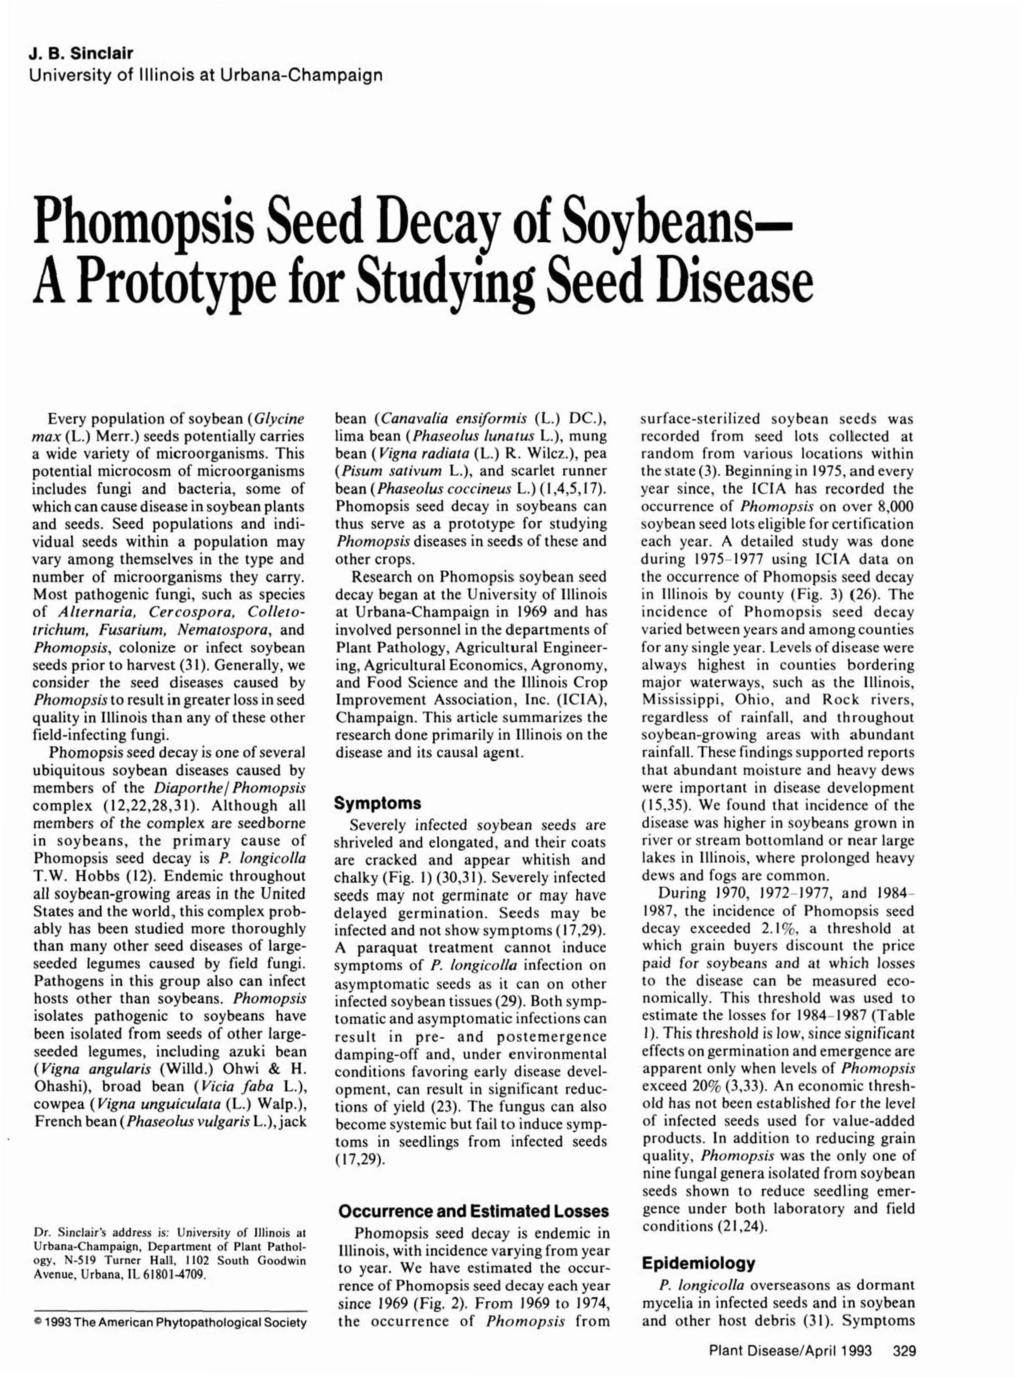 J. B. Slnclalr University of Illinois at Urbana-Champaign Phomopsis Seed Decay of Soybeans- A Prototype for Studying Seed Disease Every population of soybean I Glycine max (L.) Merr.